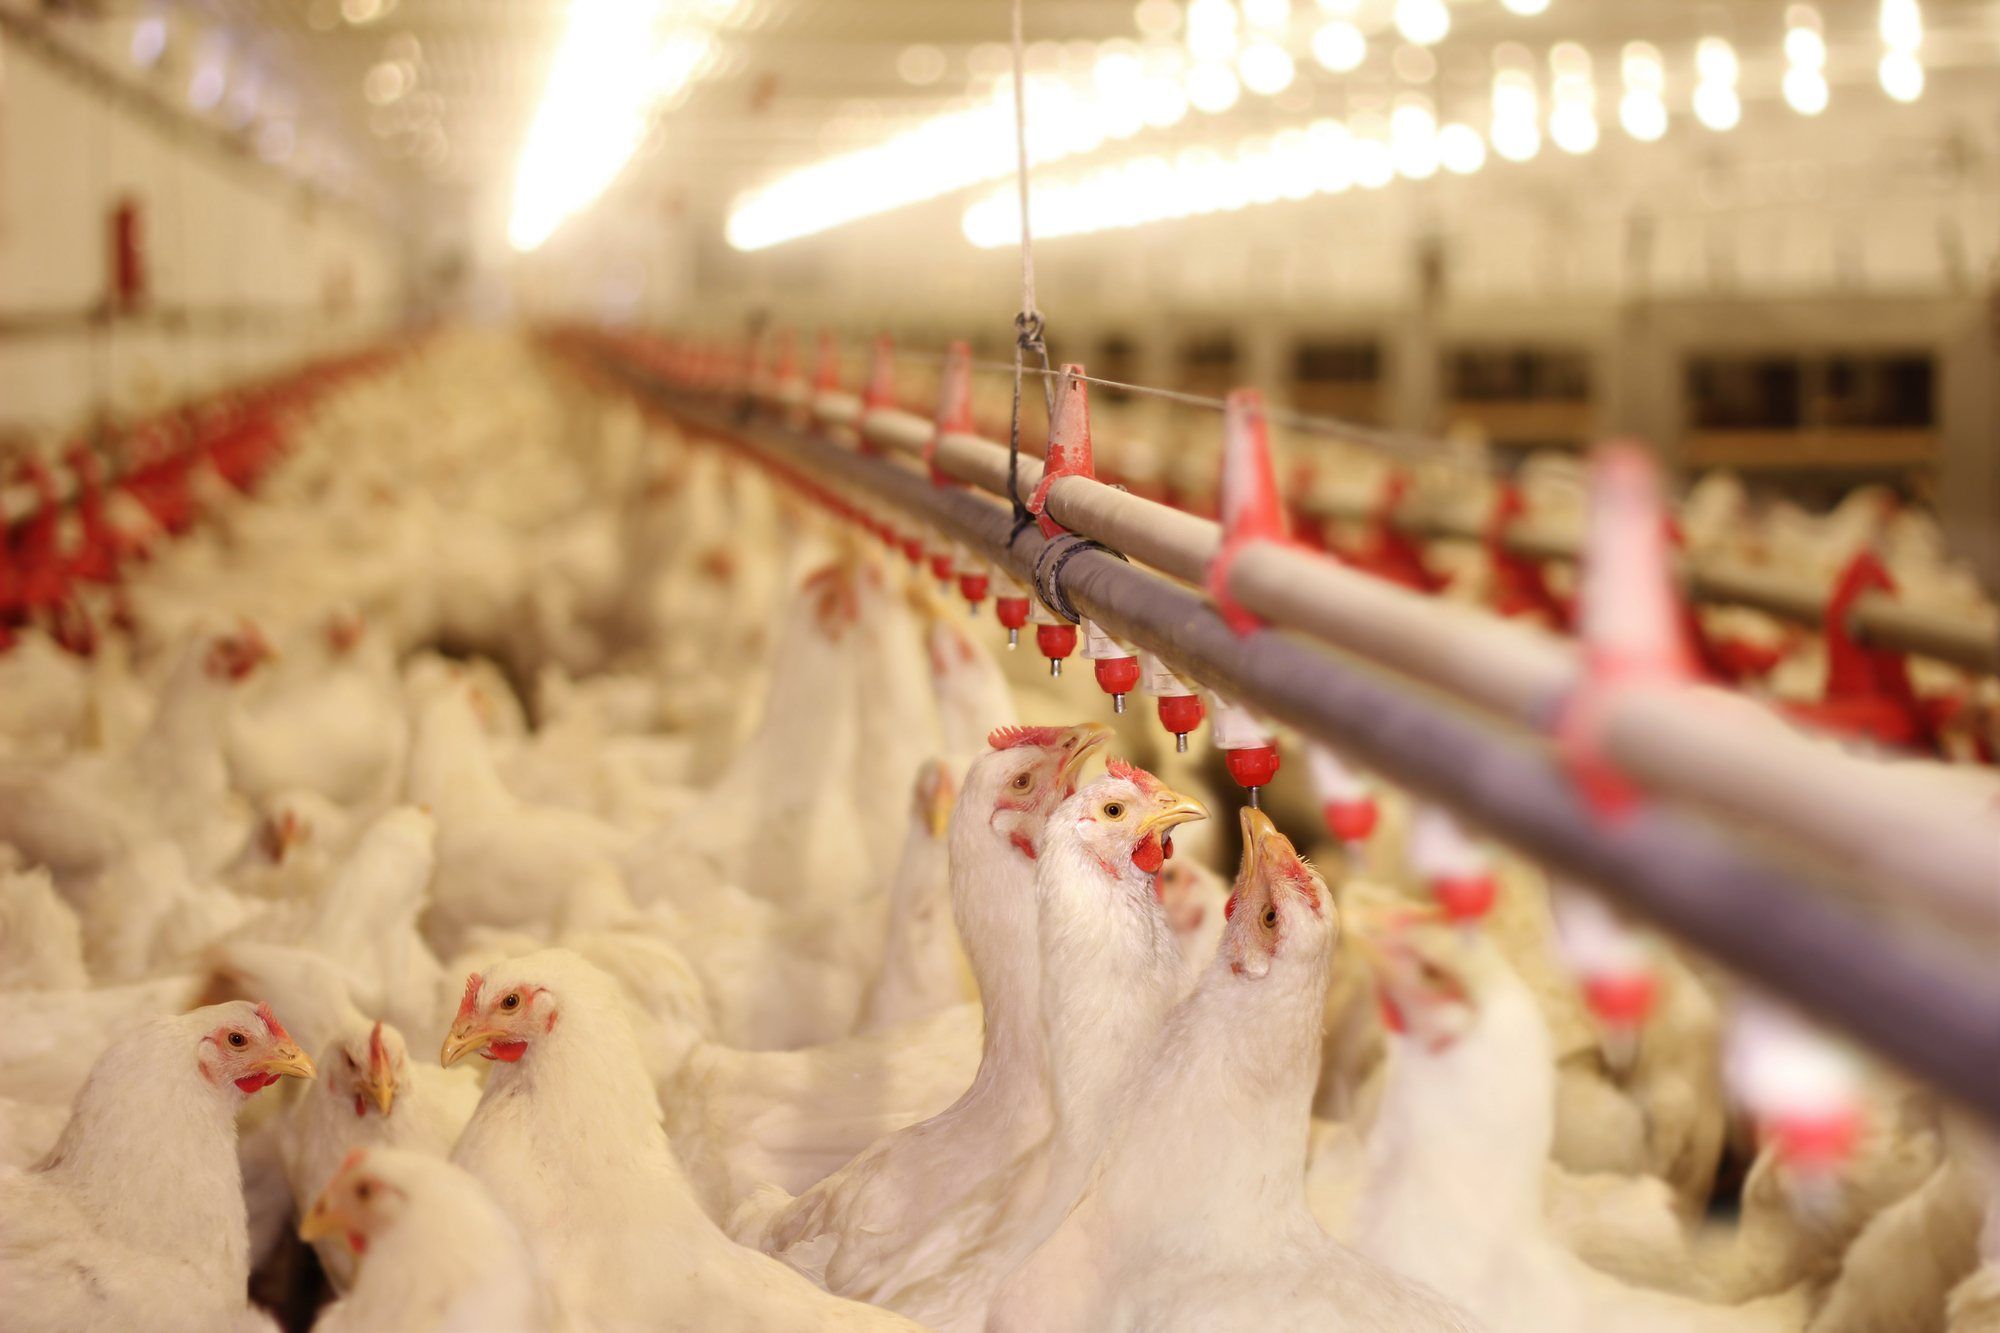 Mountaire chicken farm will pay $205 million to settle claims that its poultry processing plant contaminated air and the groundwater around it.